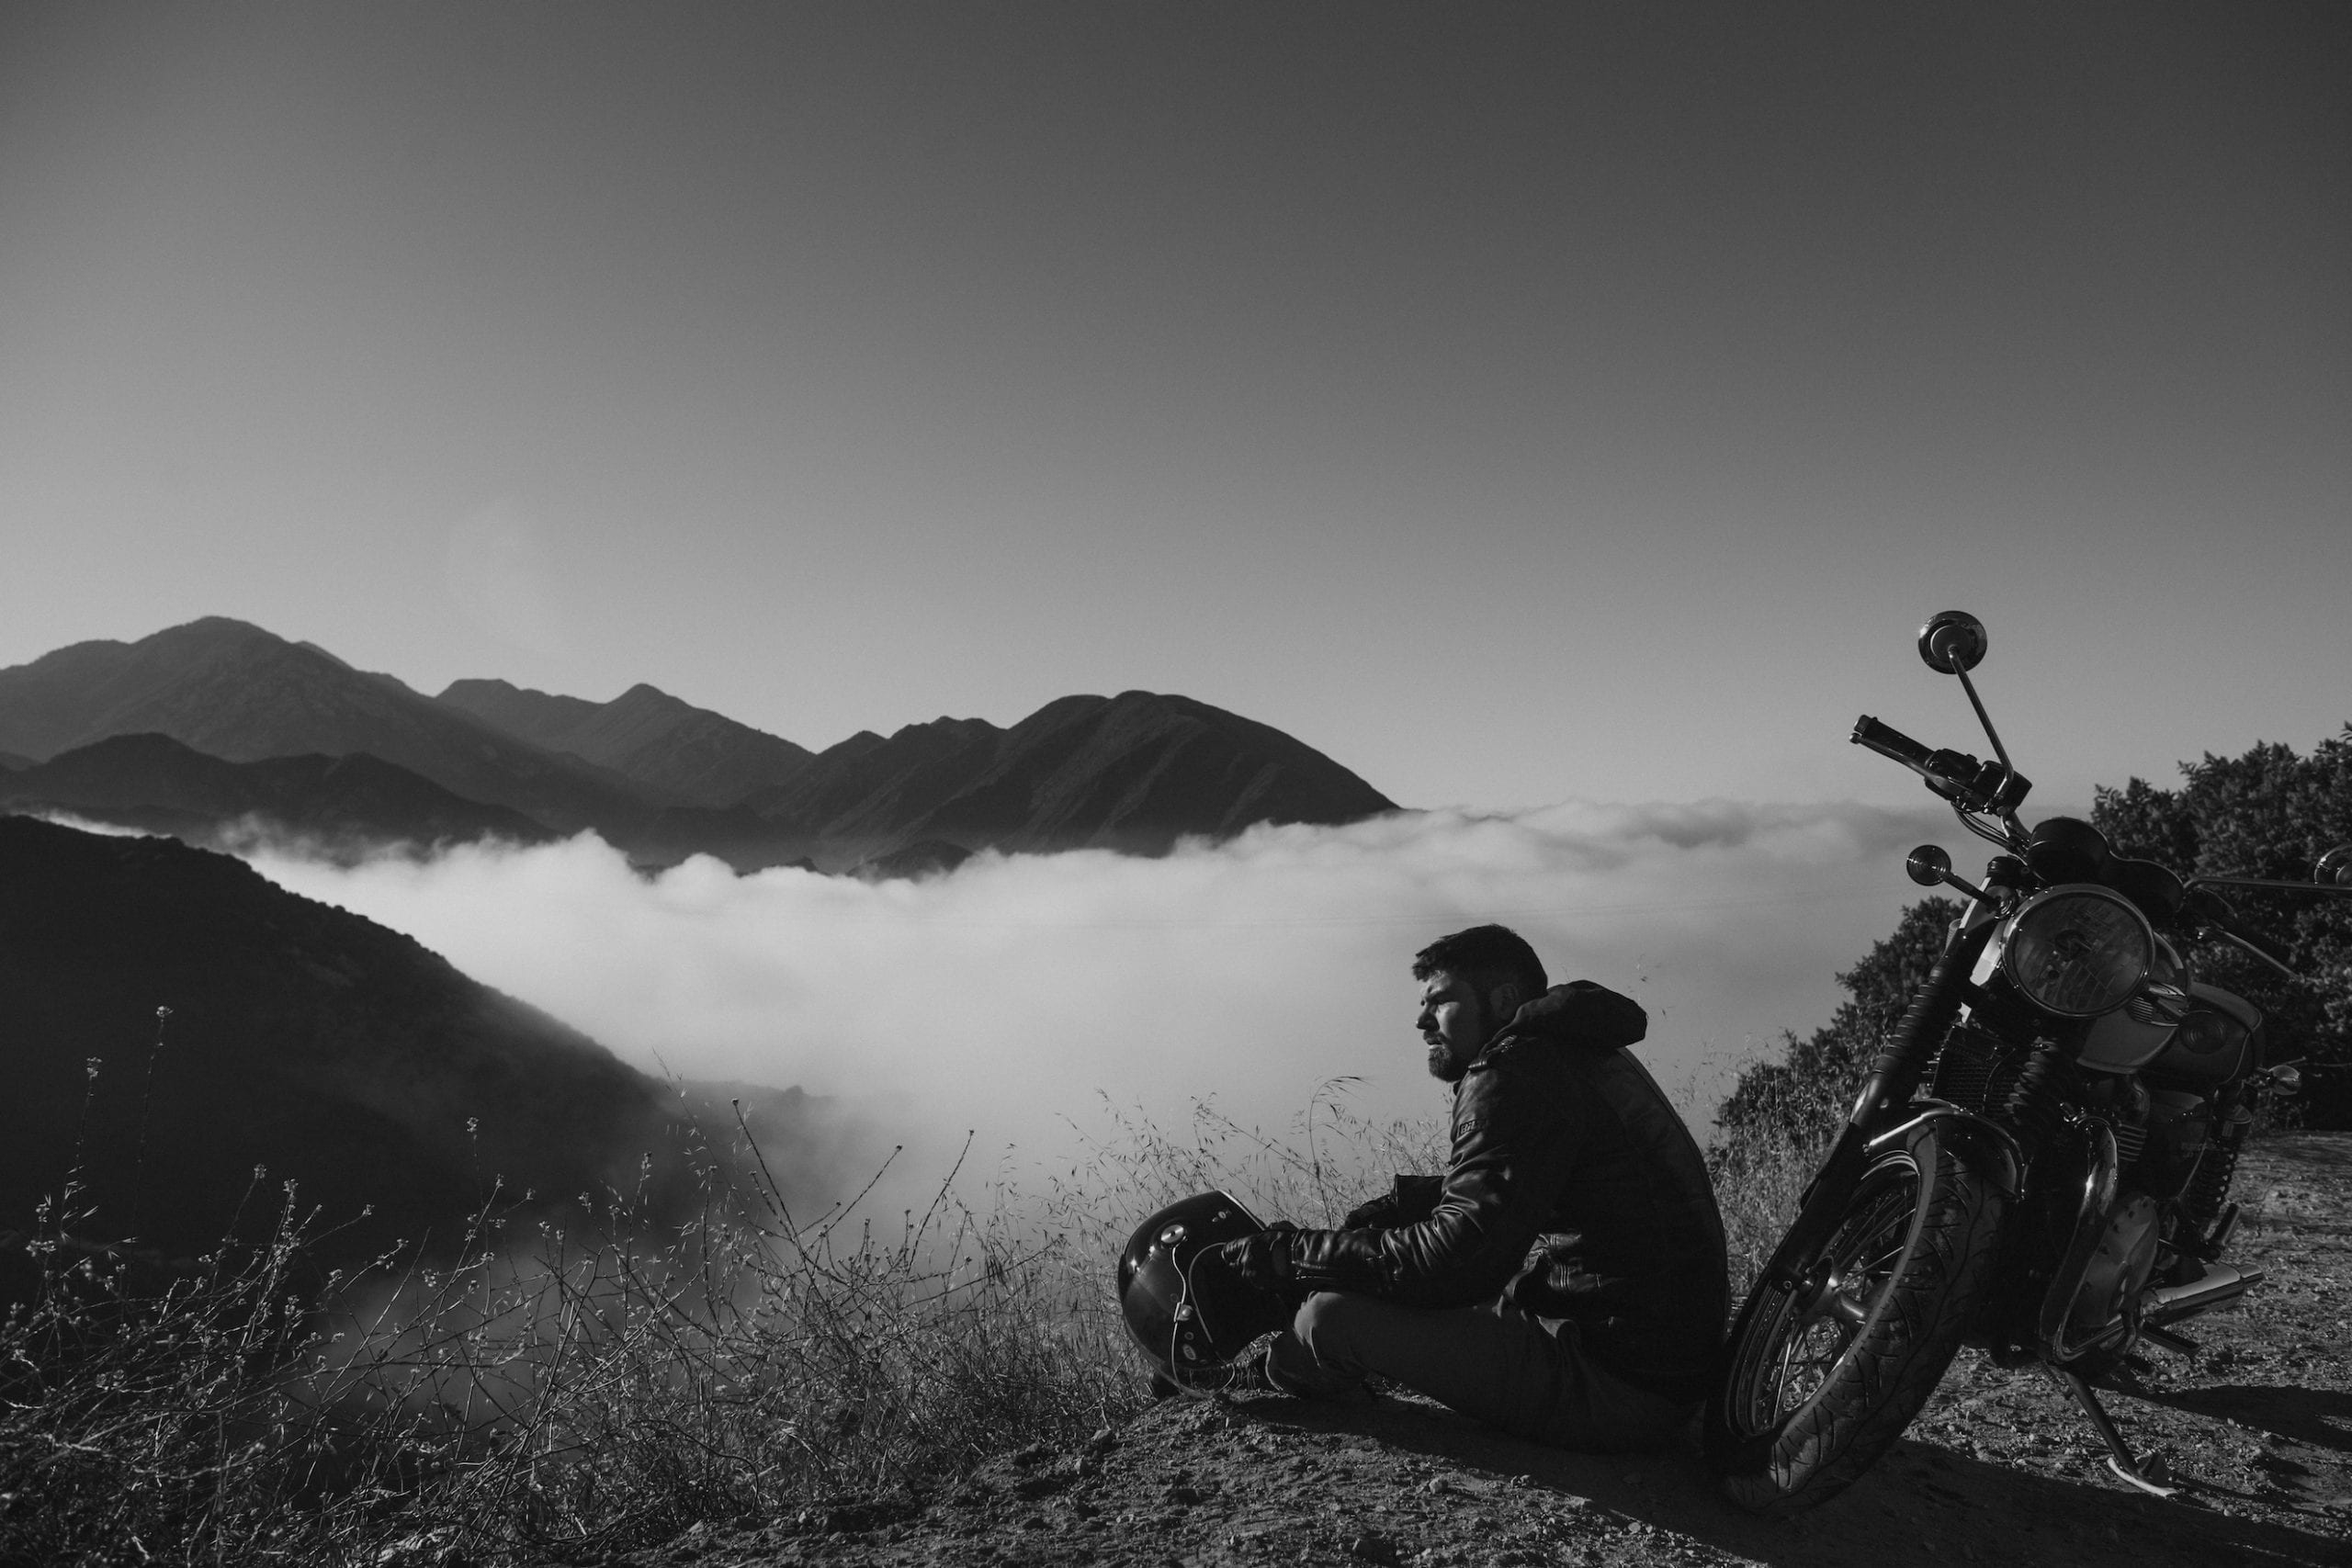 Triumph Euro Bike Shoot Black and white photo of a motorcycle rider resting above the clouds overlooking a mountain range.